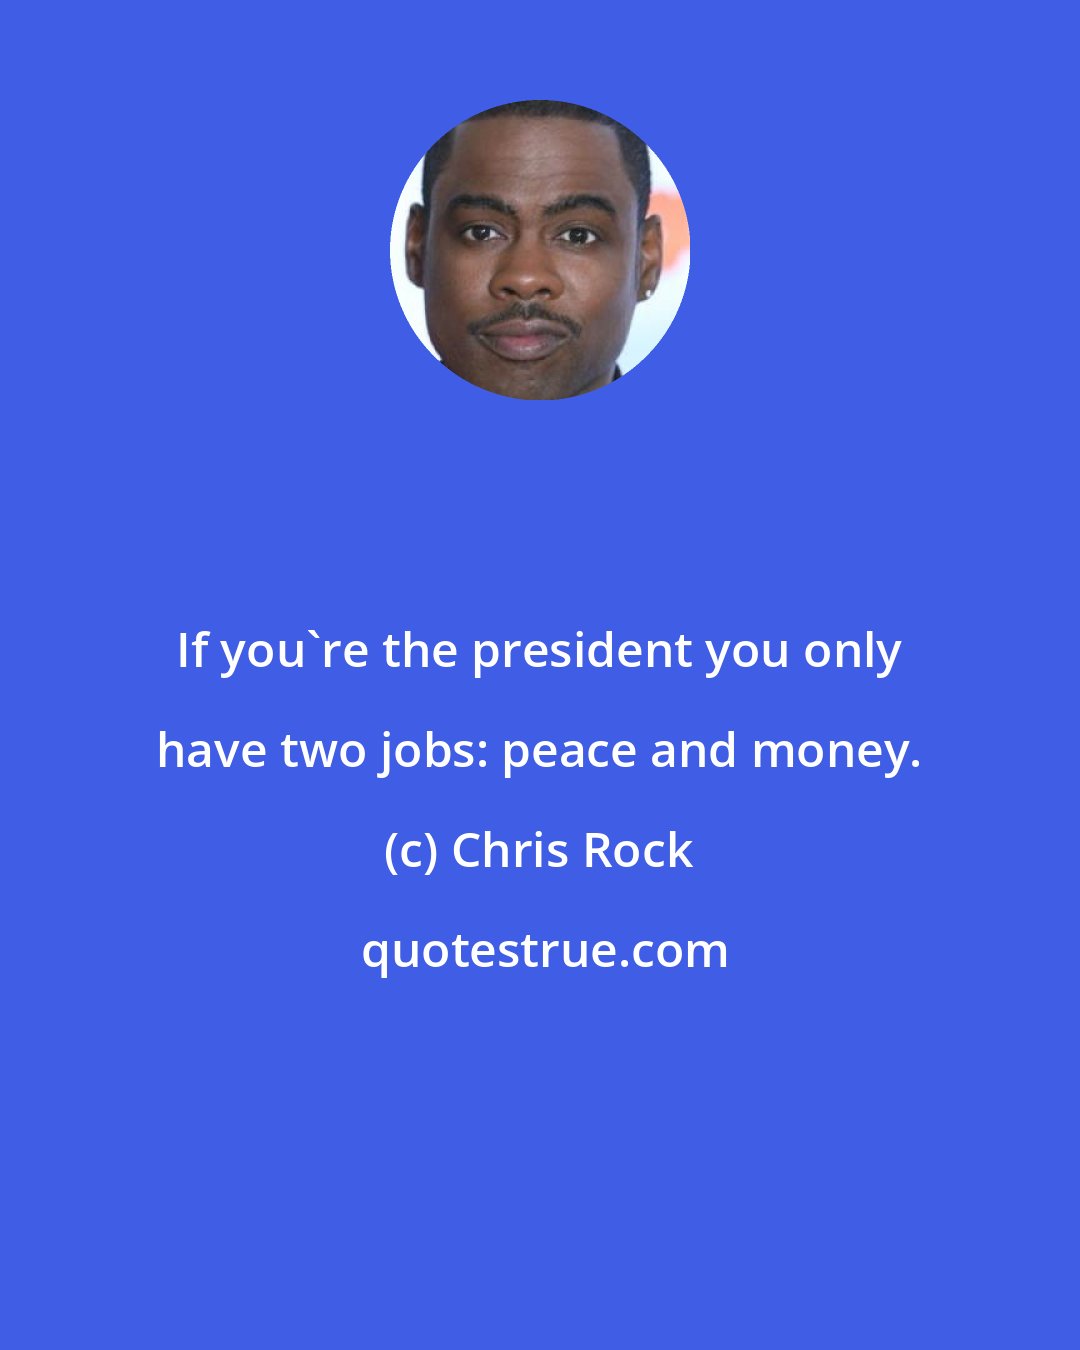 Chris Rock: If you're the president you only have two jobs: peace and money.